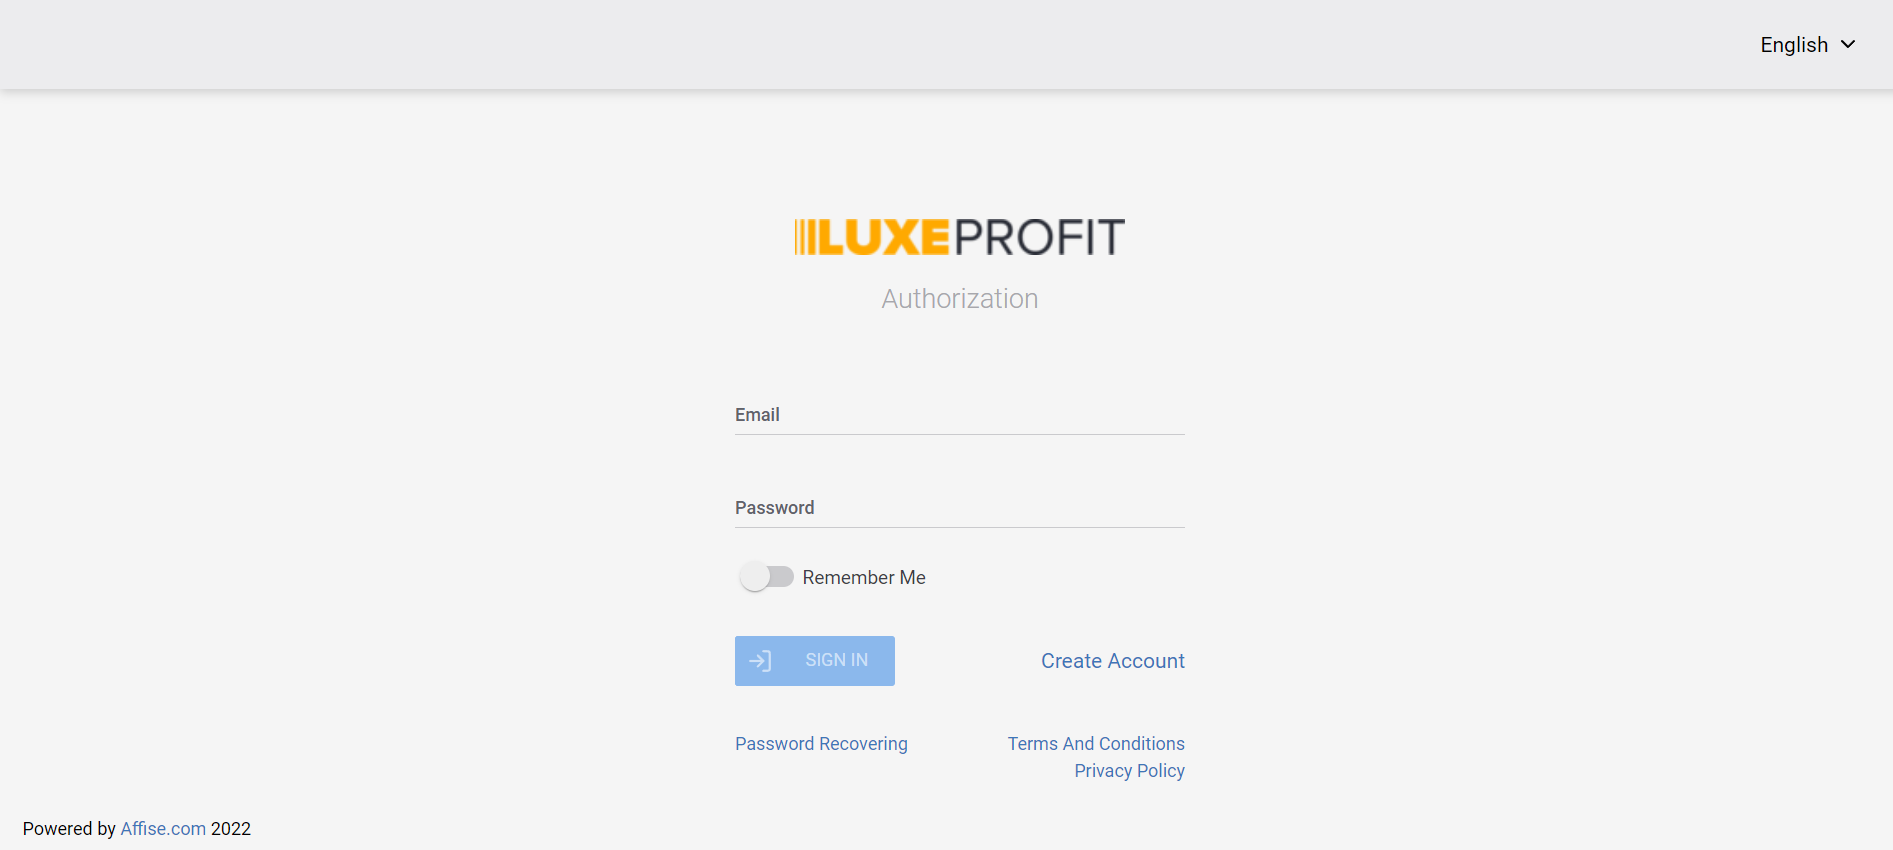 Luxeprofit Affiliate Network Review